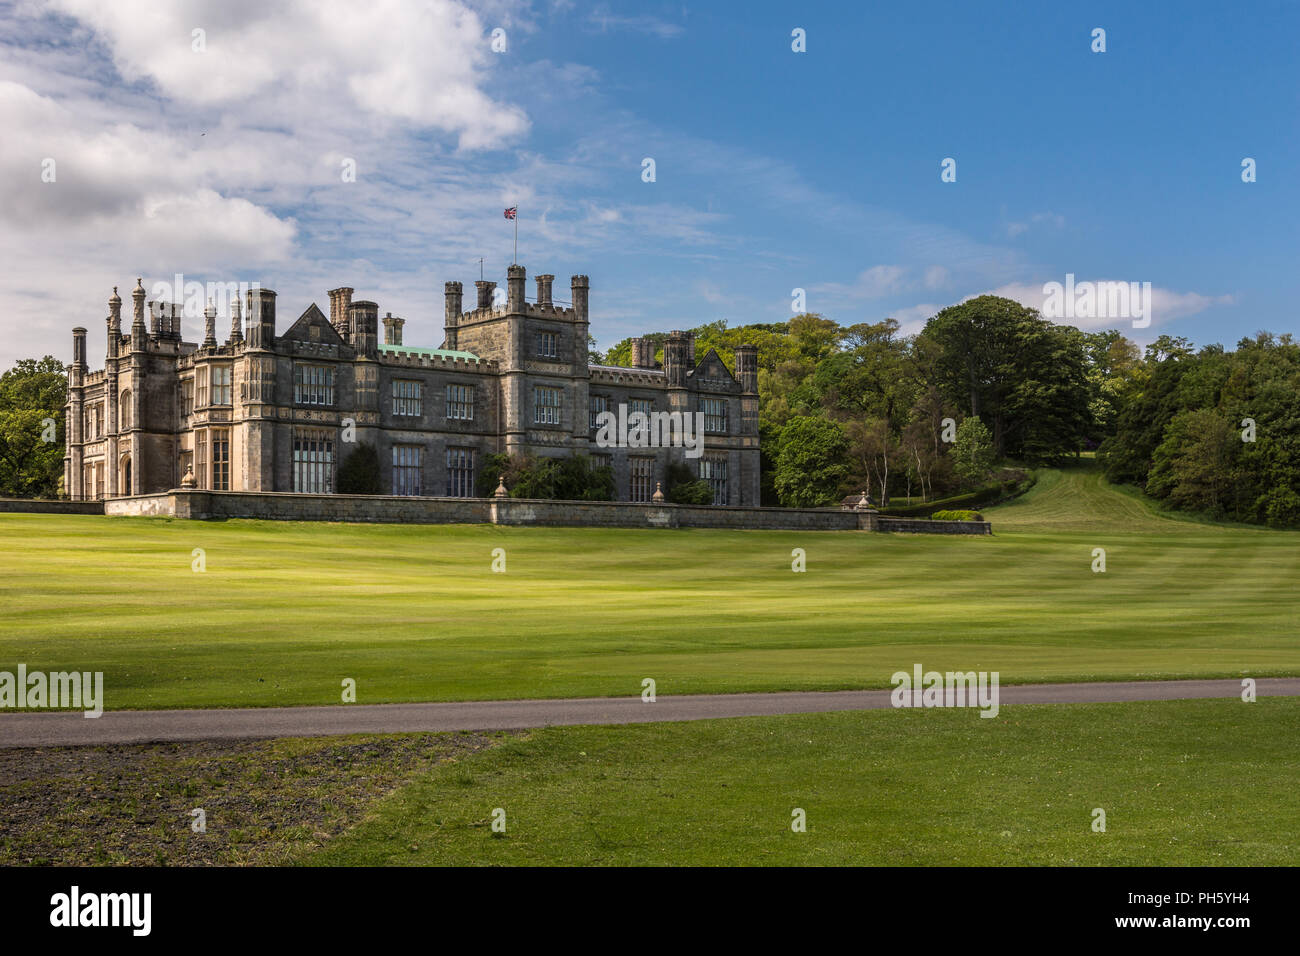 Edinburgh, Scotland, UK - June 14, 2012: Dalmany house, mansion and castle in Tudor revival style with the trees and its park in the back. Blue sky. Stock Photo